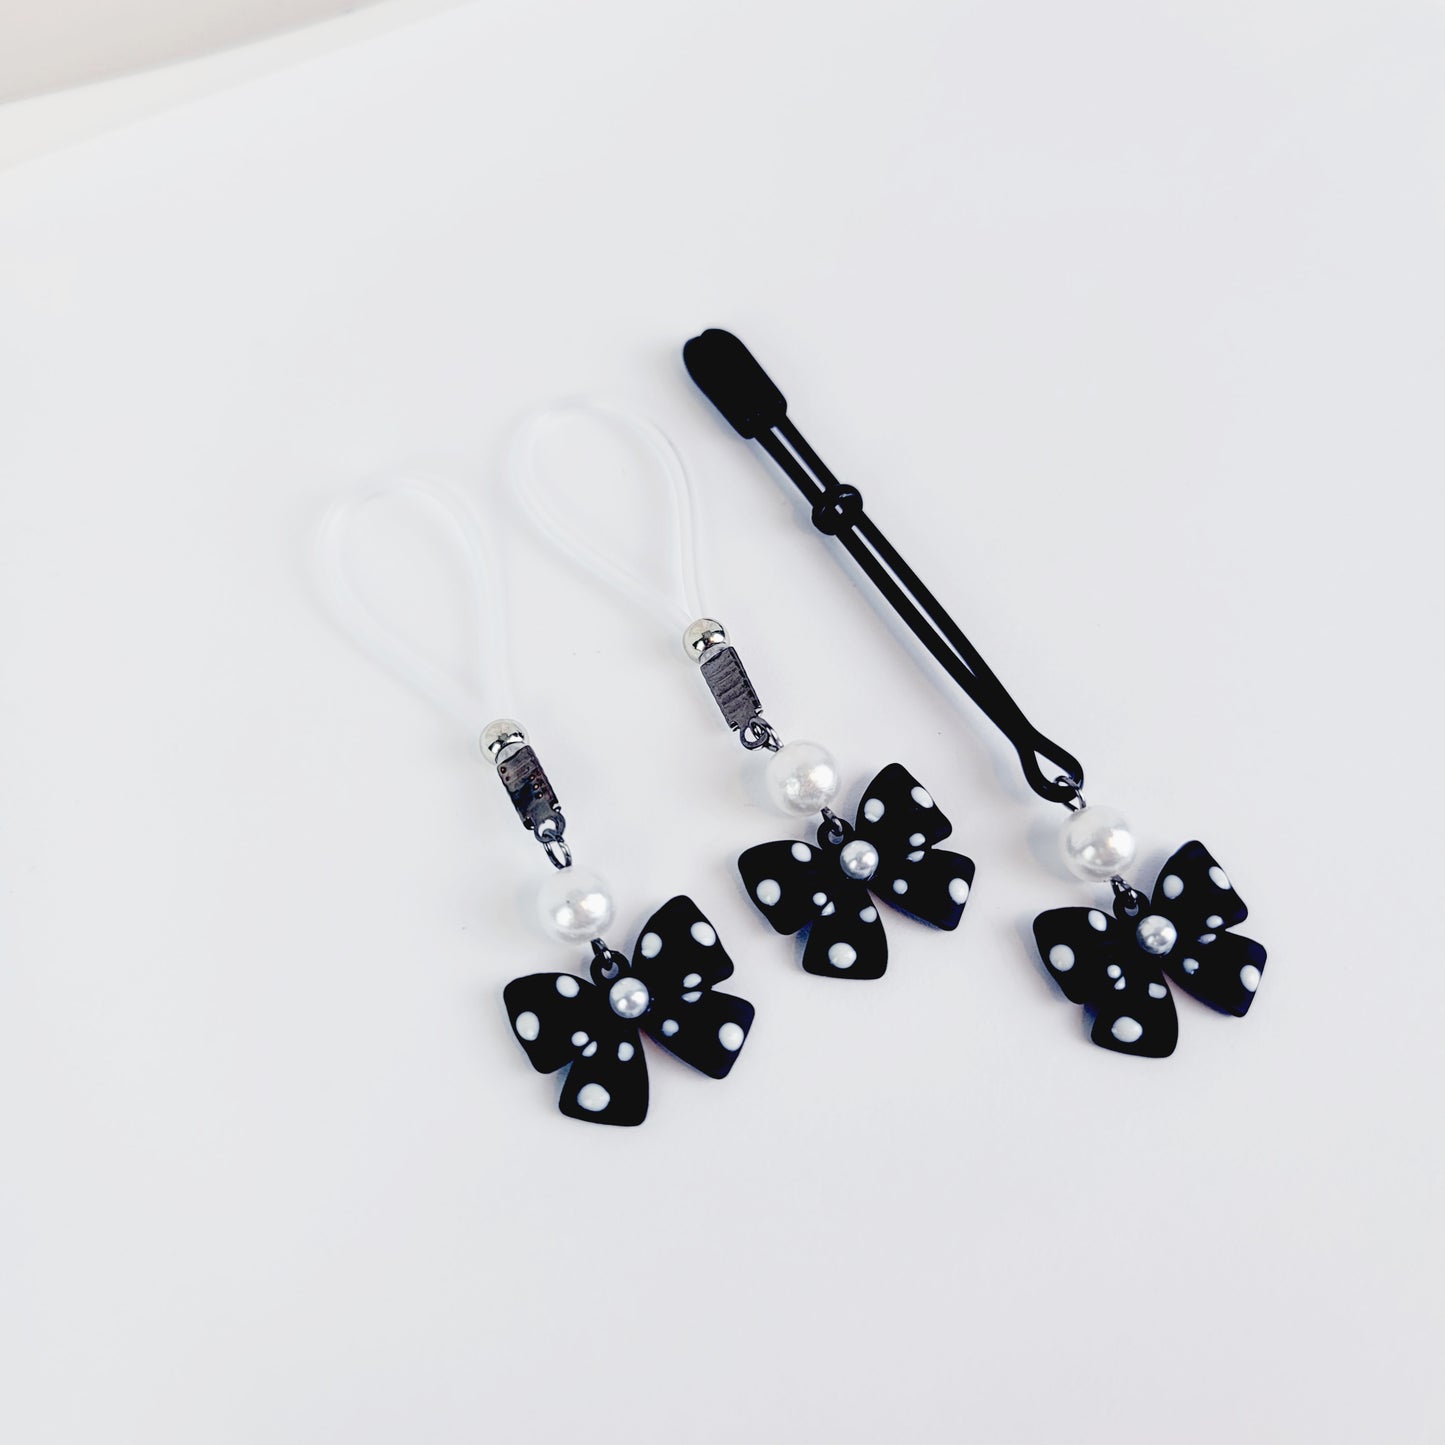 Nipple and Clit Set, Non Piercing, with Bows and Pearls. Choose Nipple Nooses or Your Choice of Nipple Clamps.